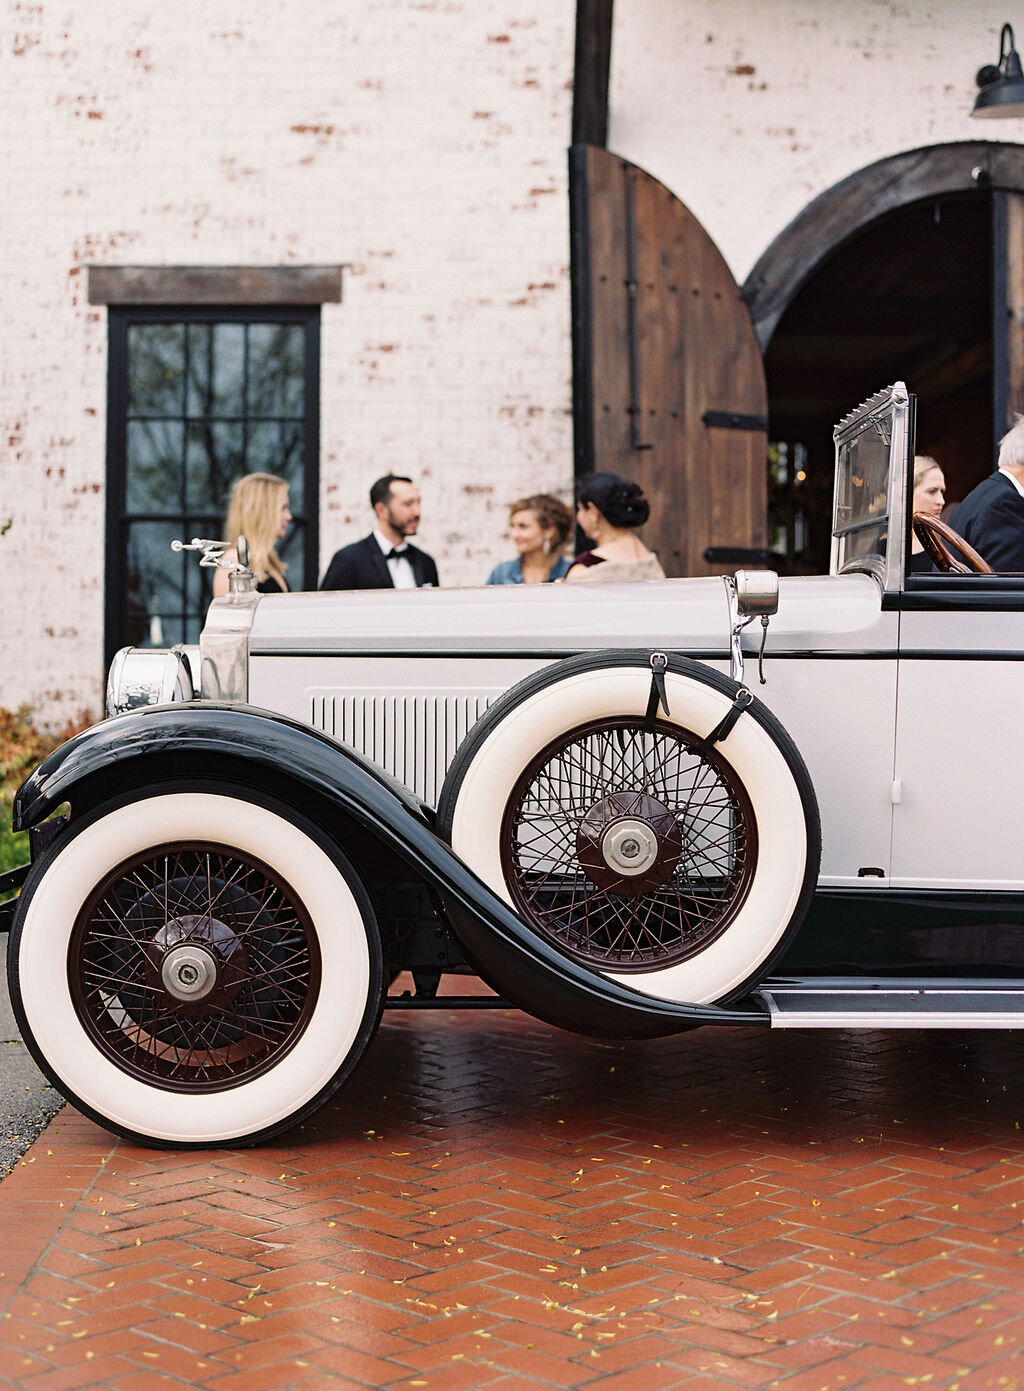 Juicy fall wedding at Trinity View Farm with styled pears and organic foraged greenery. Vintage getaway car that belonged to the bride's grandfather. Nashville wedding and corporate event floral designer, Mary Love Richardson of Rosemary & Finch.